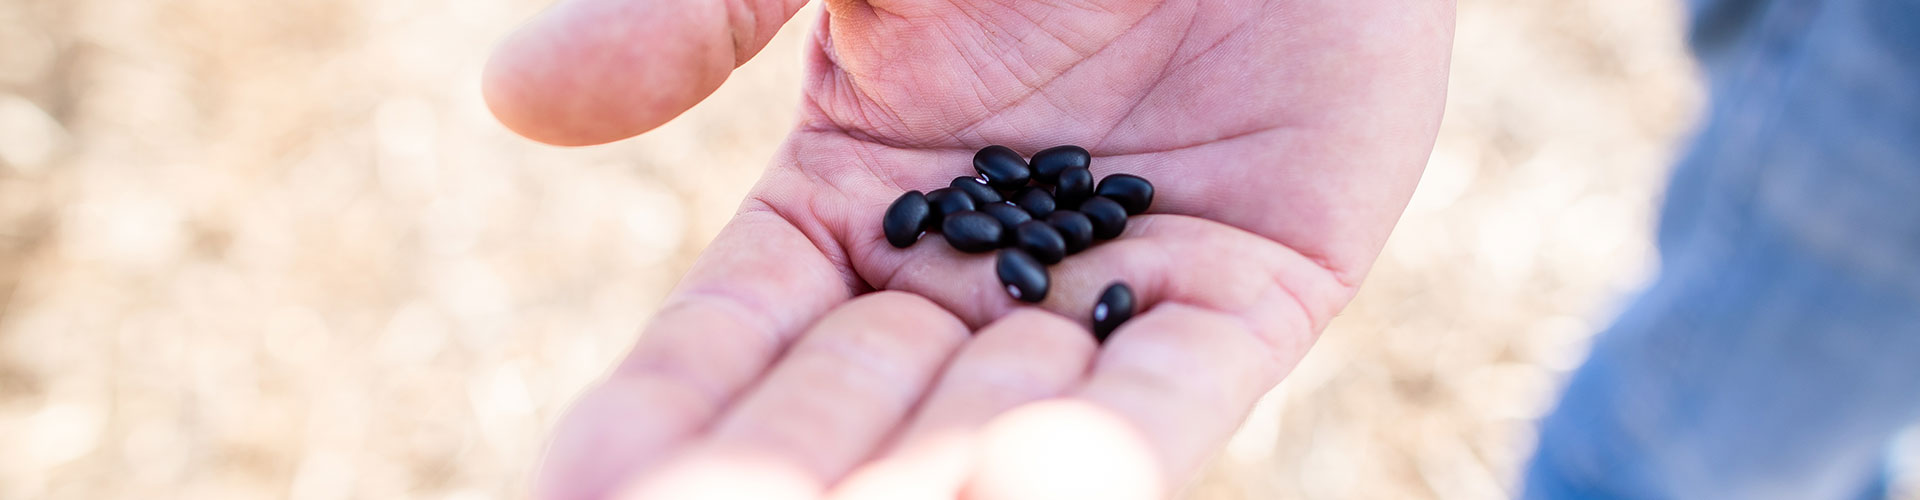 Grower holding black beans in field